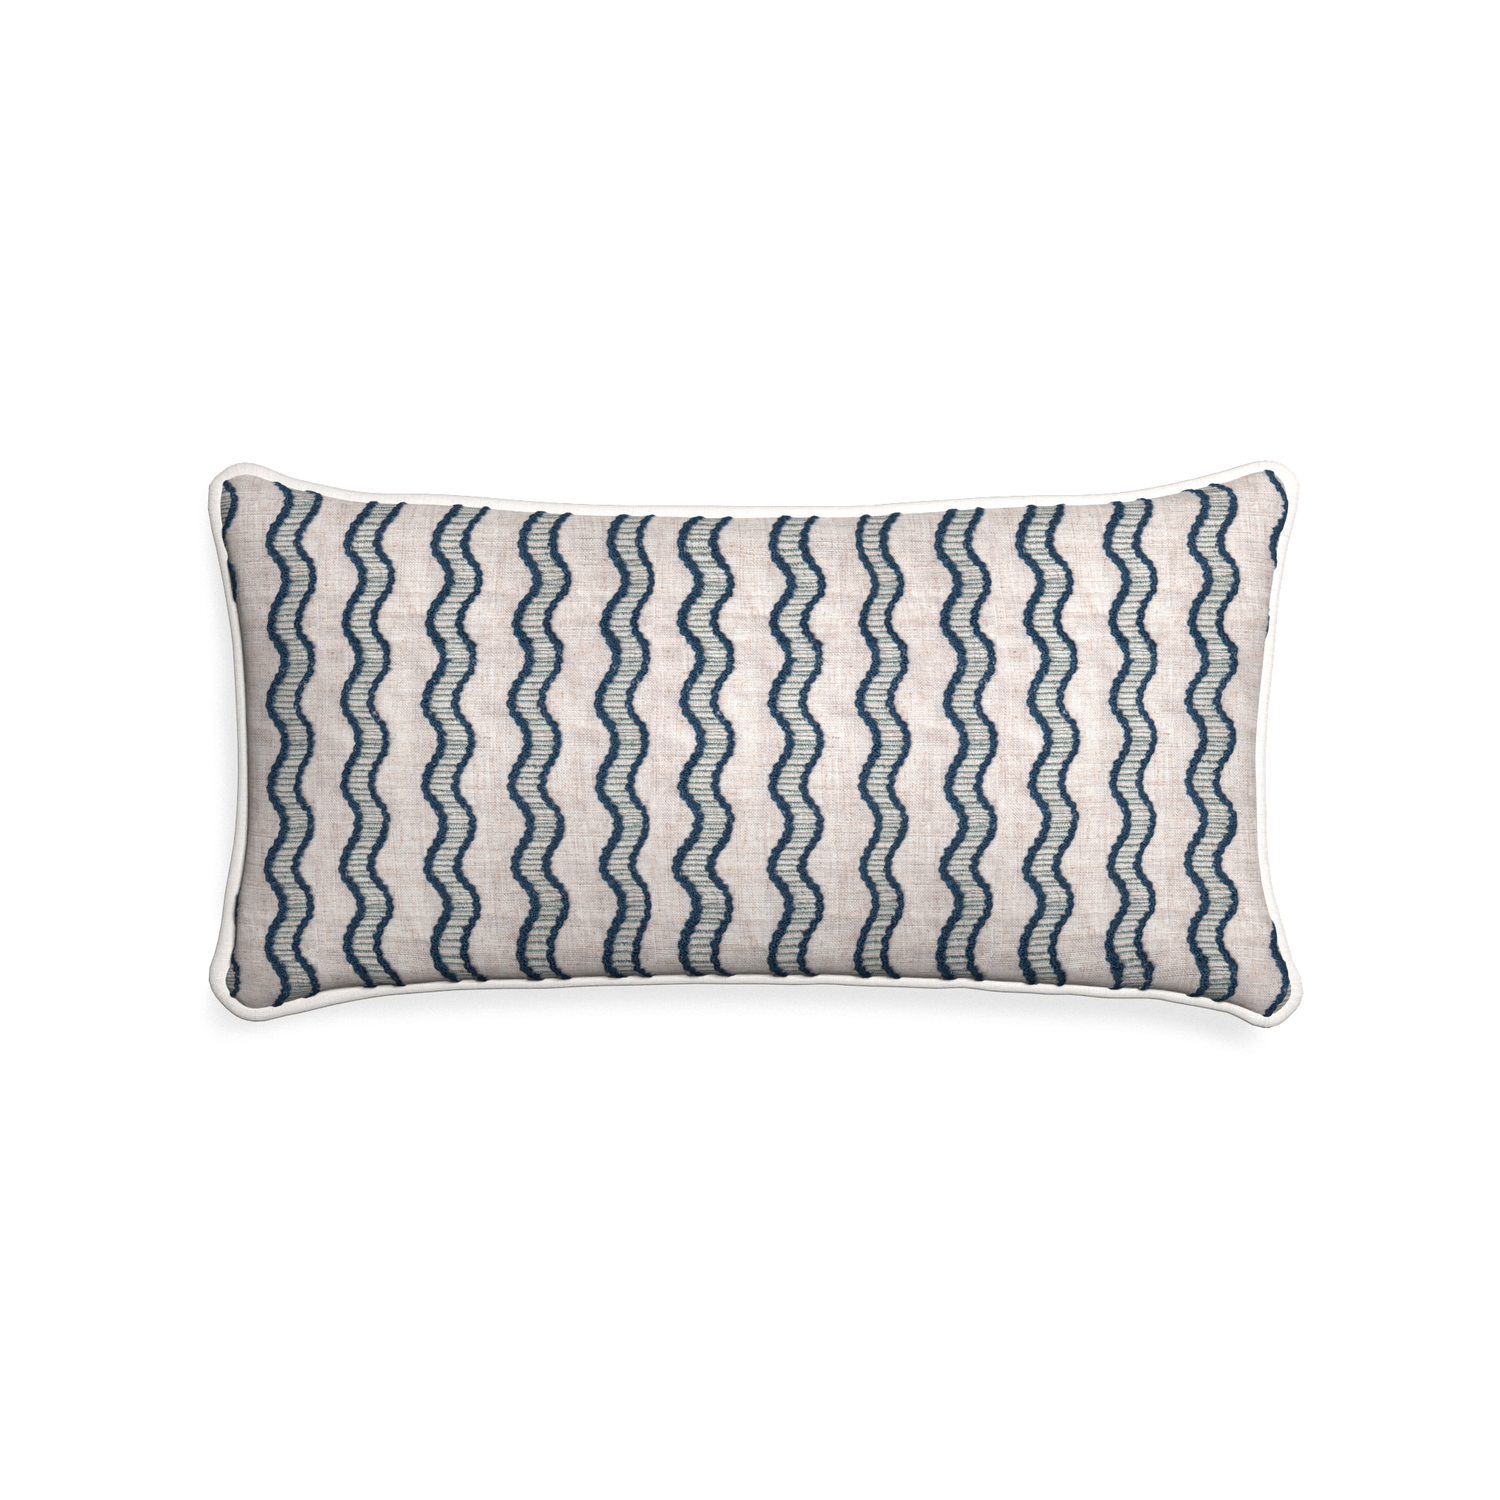 Midi-lumbar beatrice custom embroidered wavepillow with snow piping on white background